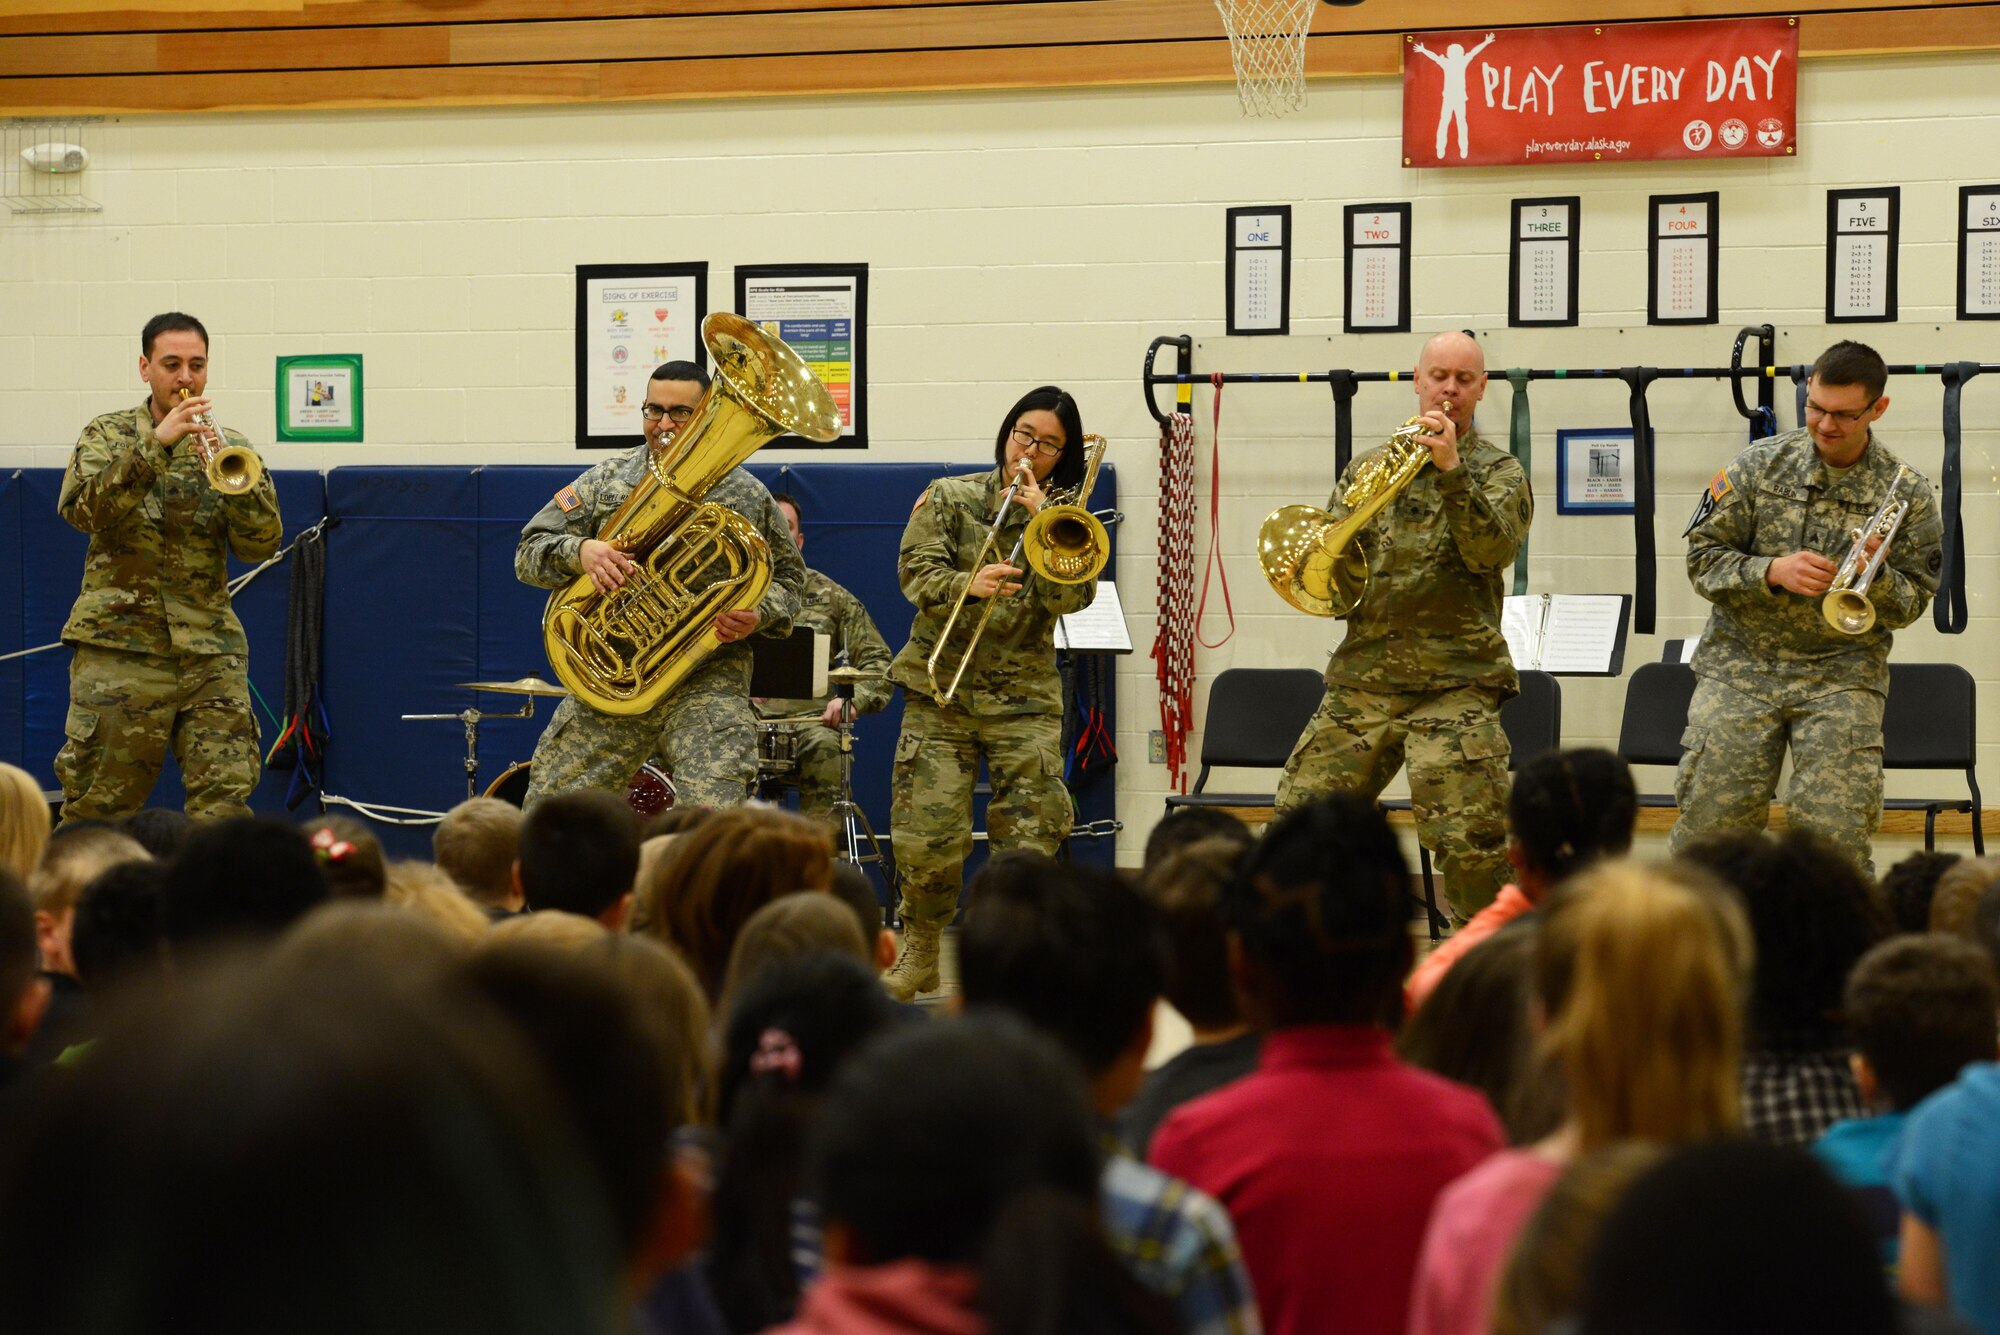 The 9th Army Band group ‘Frigid Brass’ performs for the children of Orion Elementary School, Joint Base Elmendorf-Richardson, Alaska, Feb. 21, 2017. ‘Frigid Brass’ performed many different genres of music and taught the children the first steps in playing each instrument to spark an interest in the musical arts.